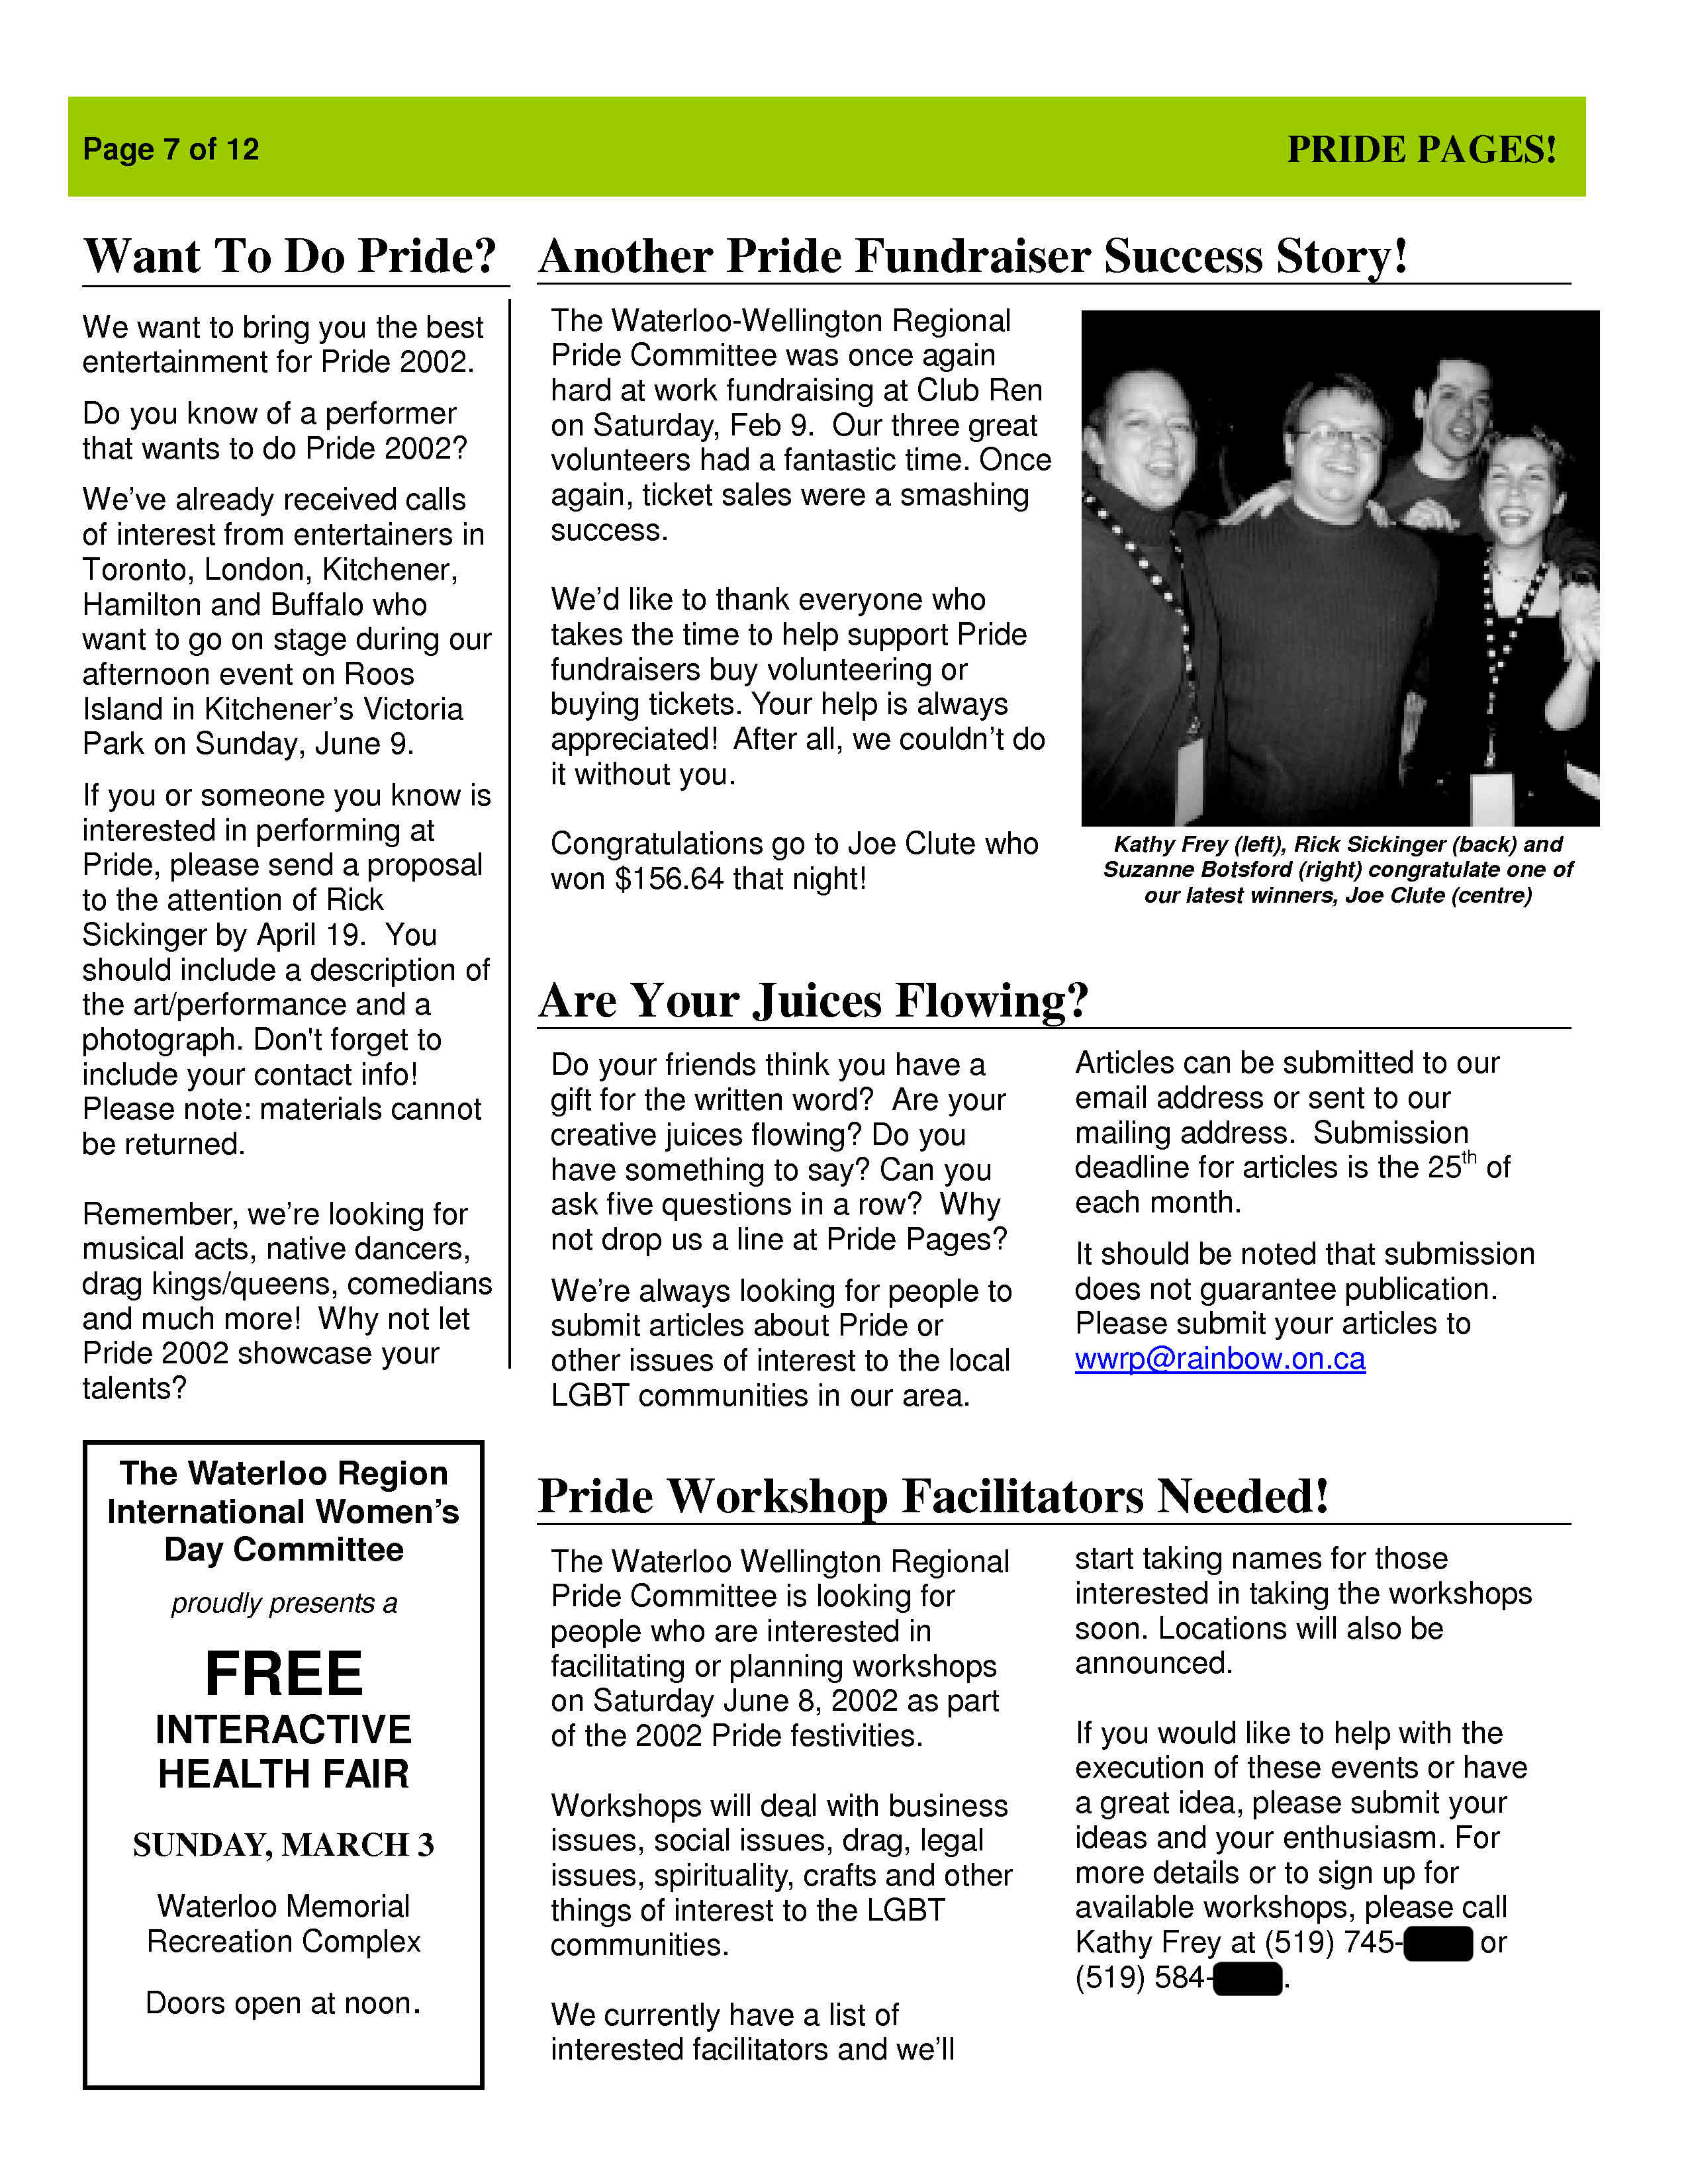 Pride Pages 2002-03 p7